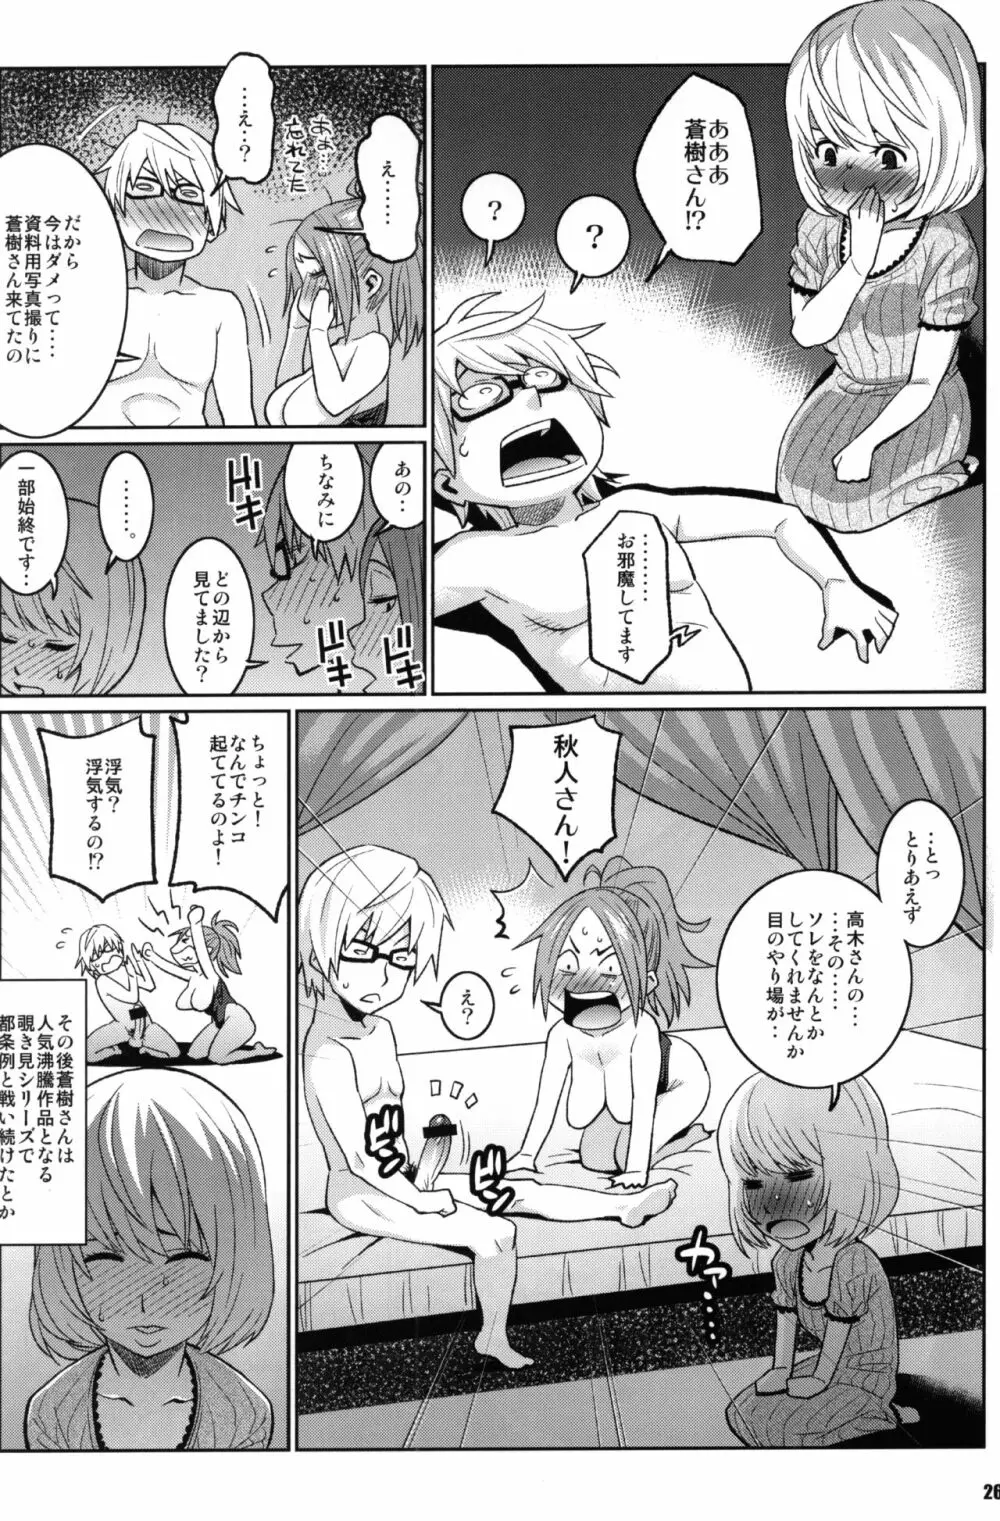 BAKUNEW 3 - page25